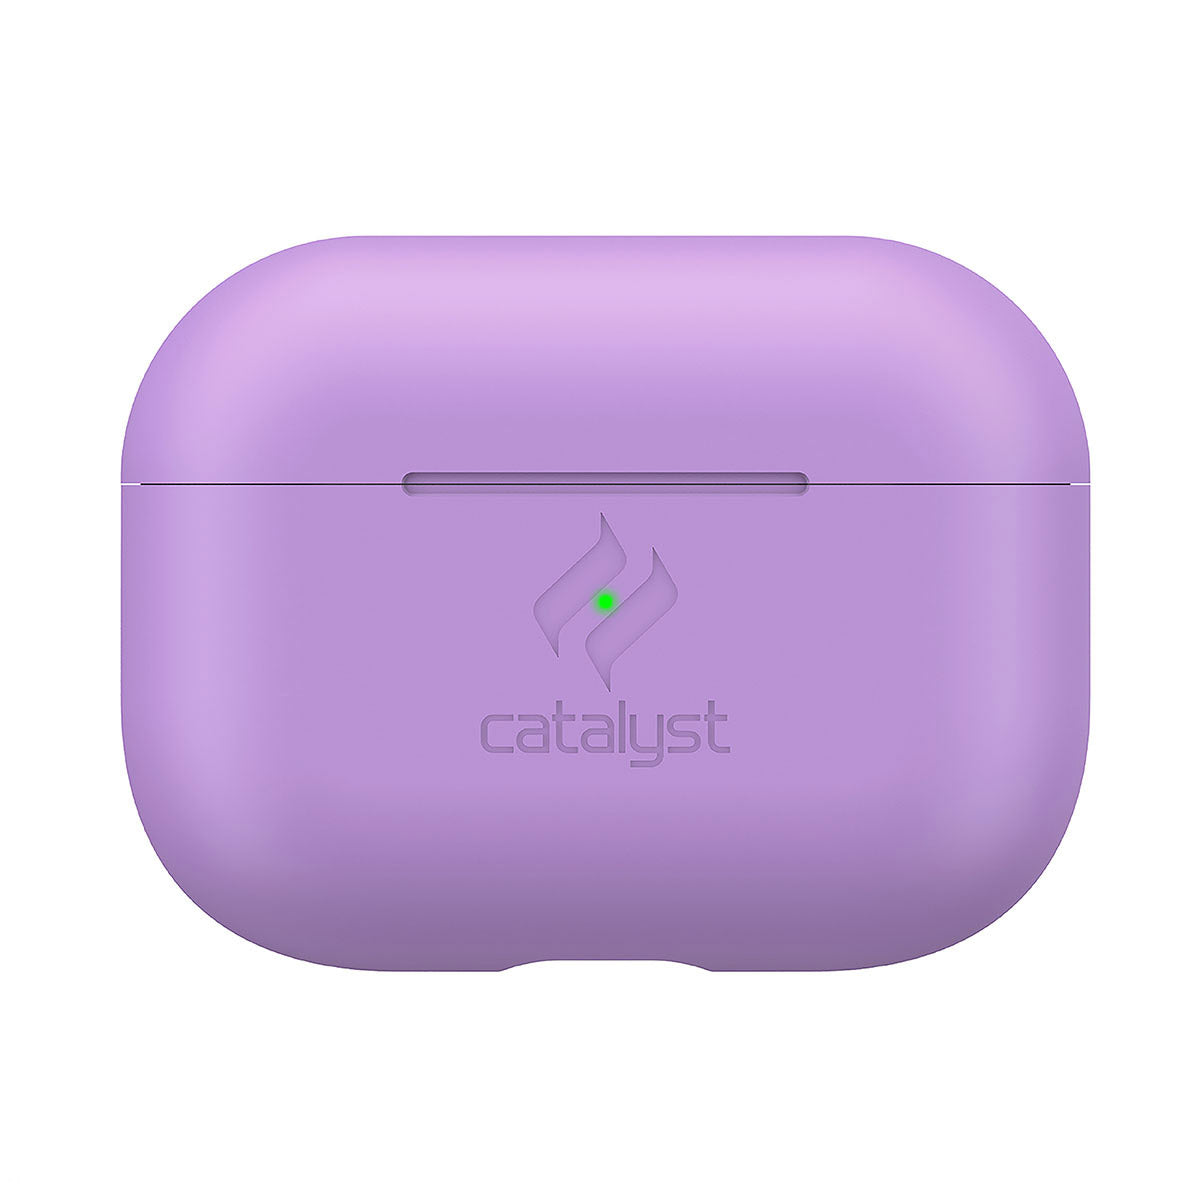 Catalyst airpods pro gen 2/1 slim case showing front view of the case in lilac colorway